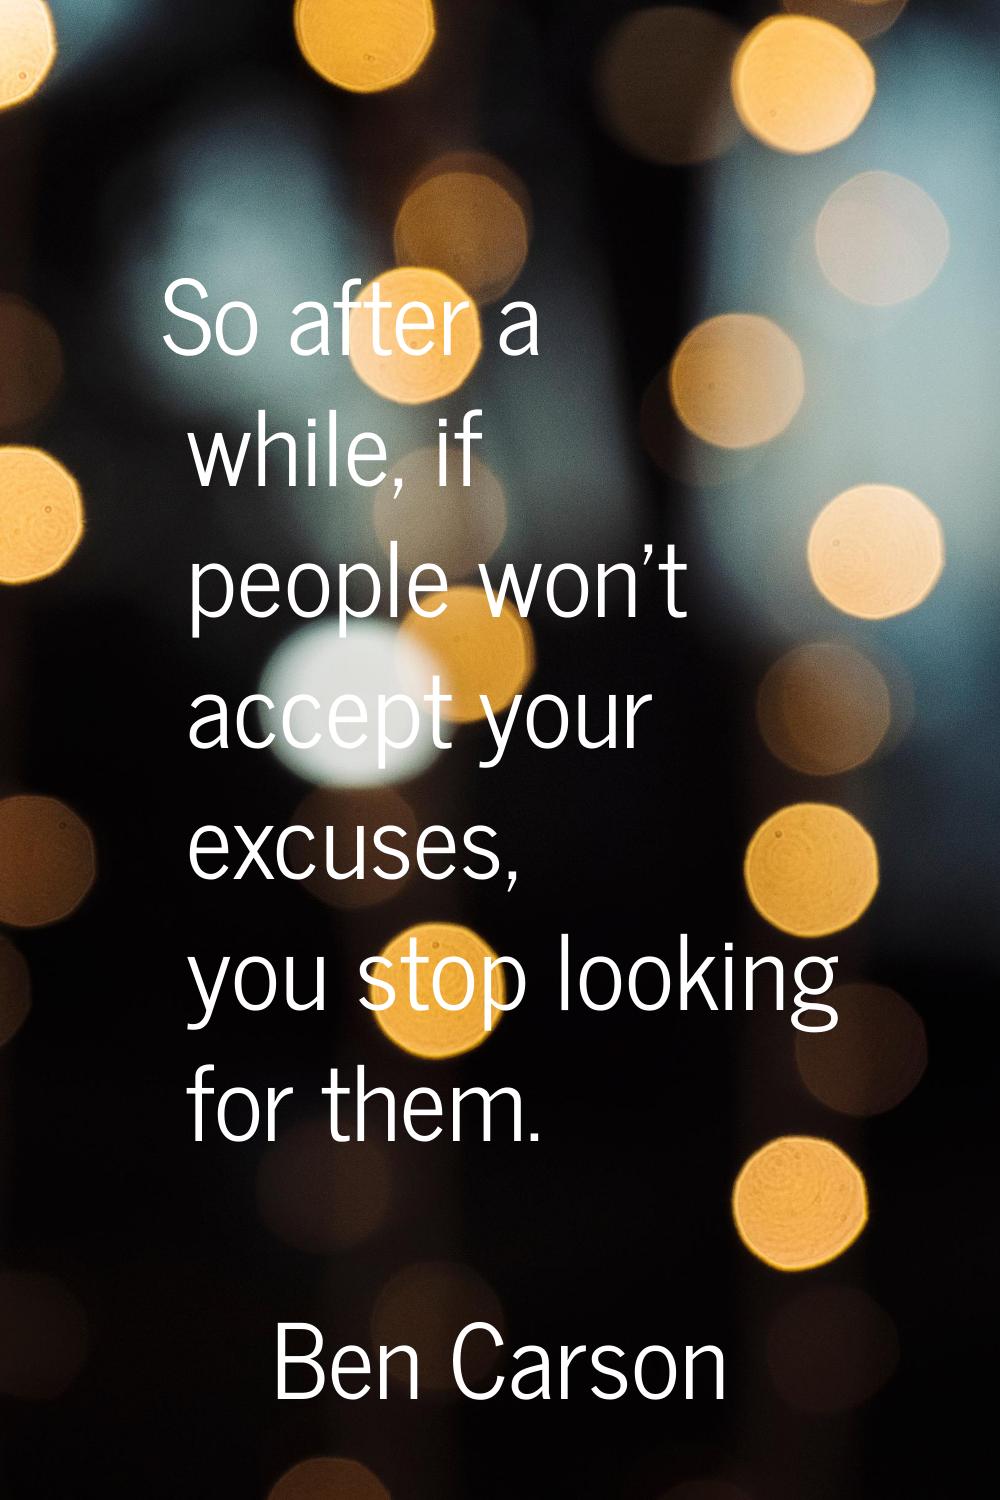 So after a while, if people won't accept your excuses, you stop looking for them.